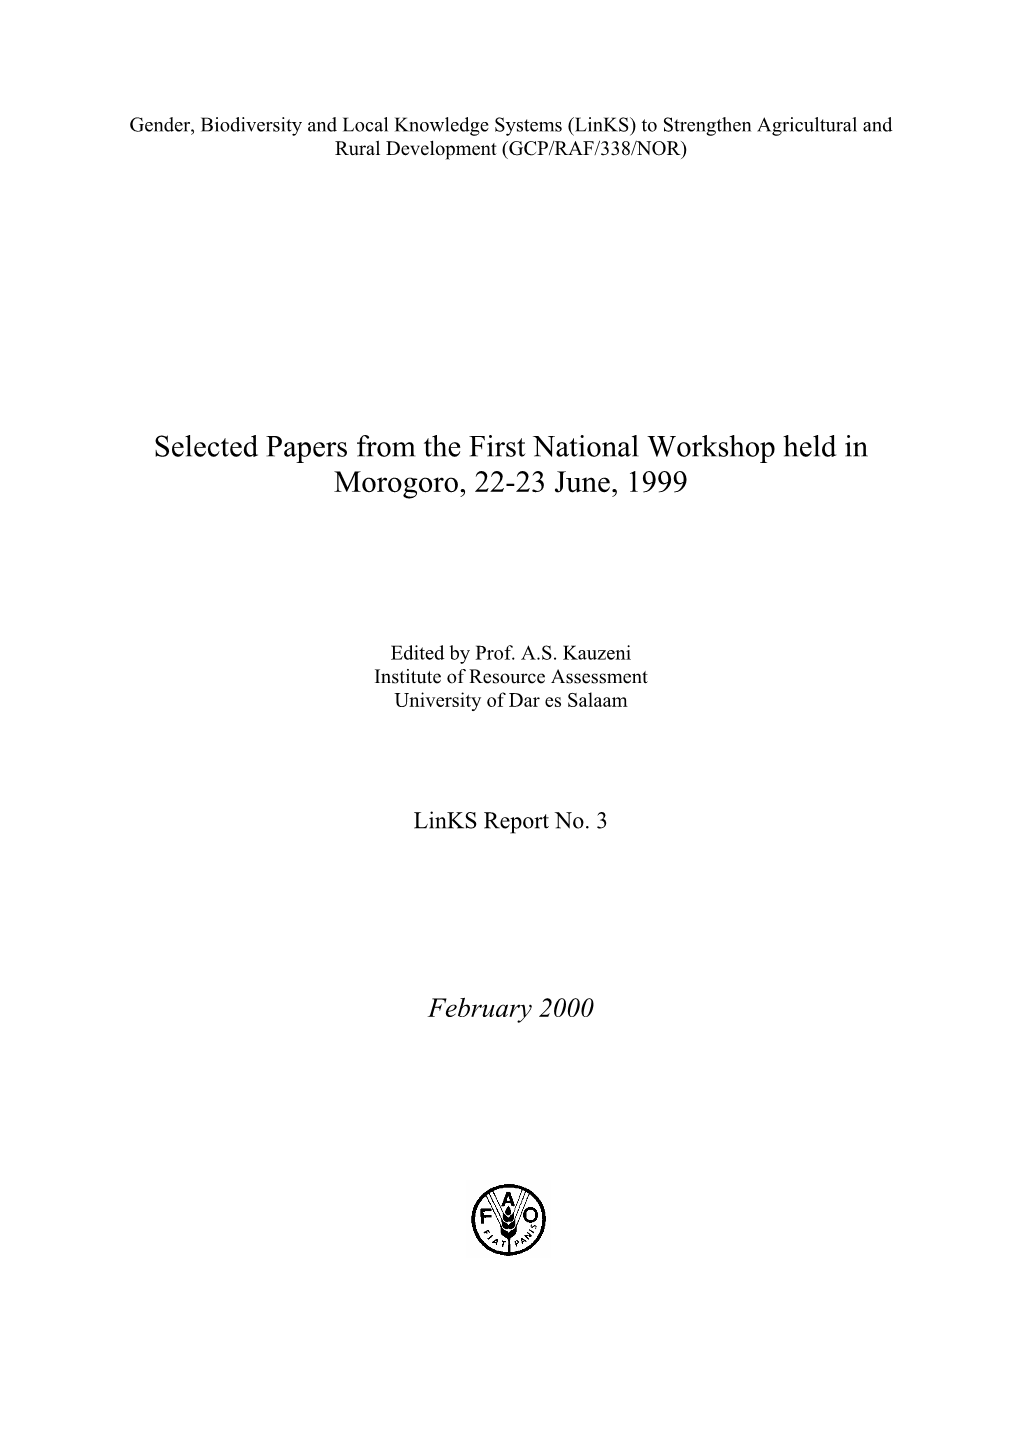 Selected Papers from the First National Workshop Held in Morogoro, 22-23 June, 1999